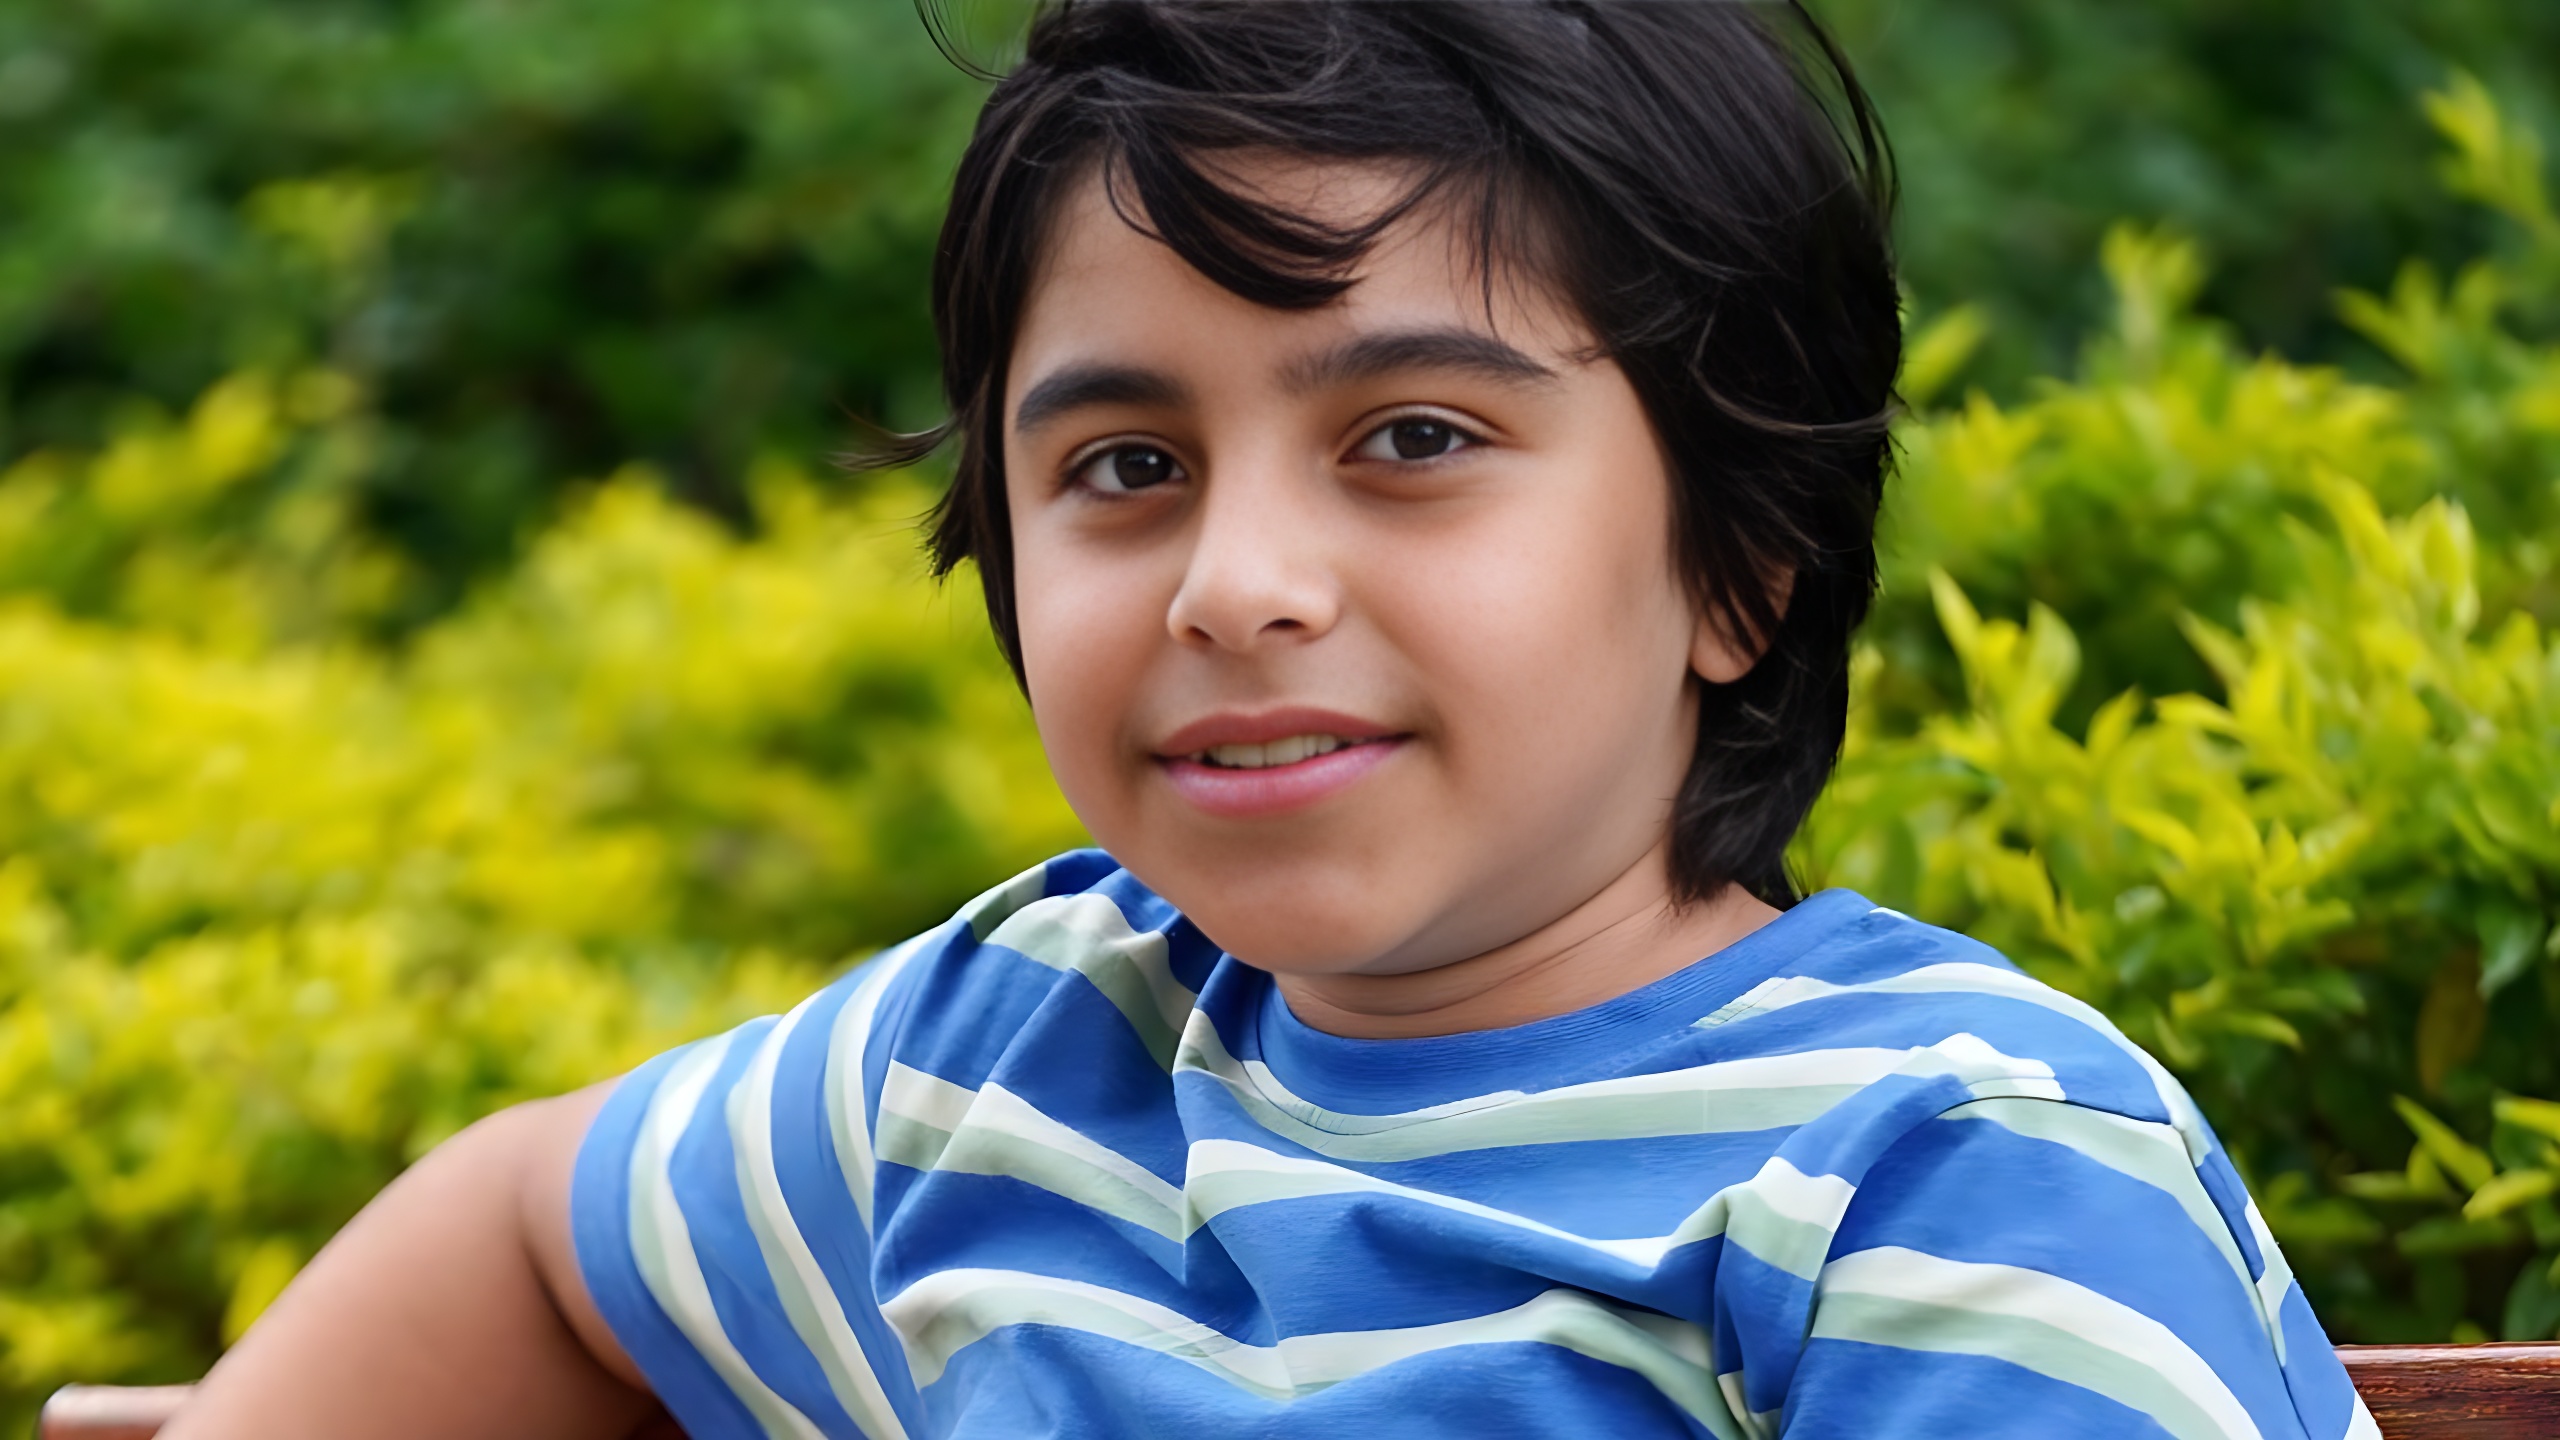 Harshil Thakkar (Child Actor) Age, Career, Biography, Movies, Ad & More